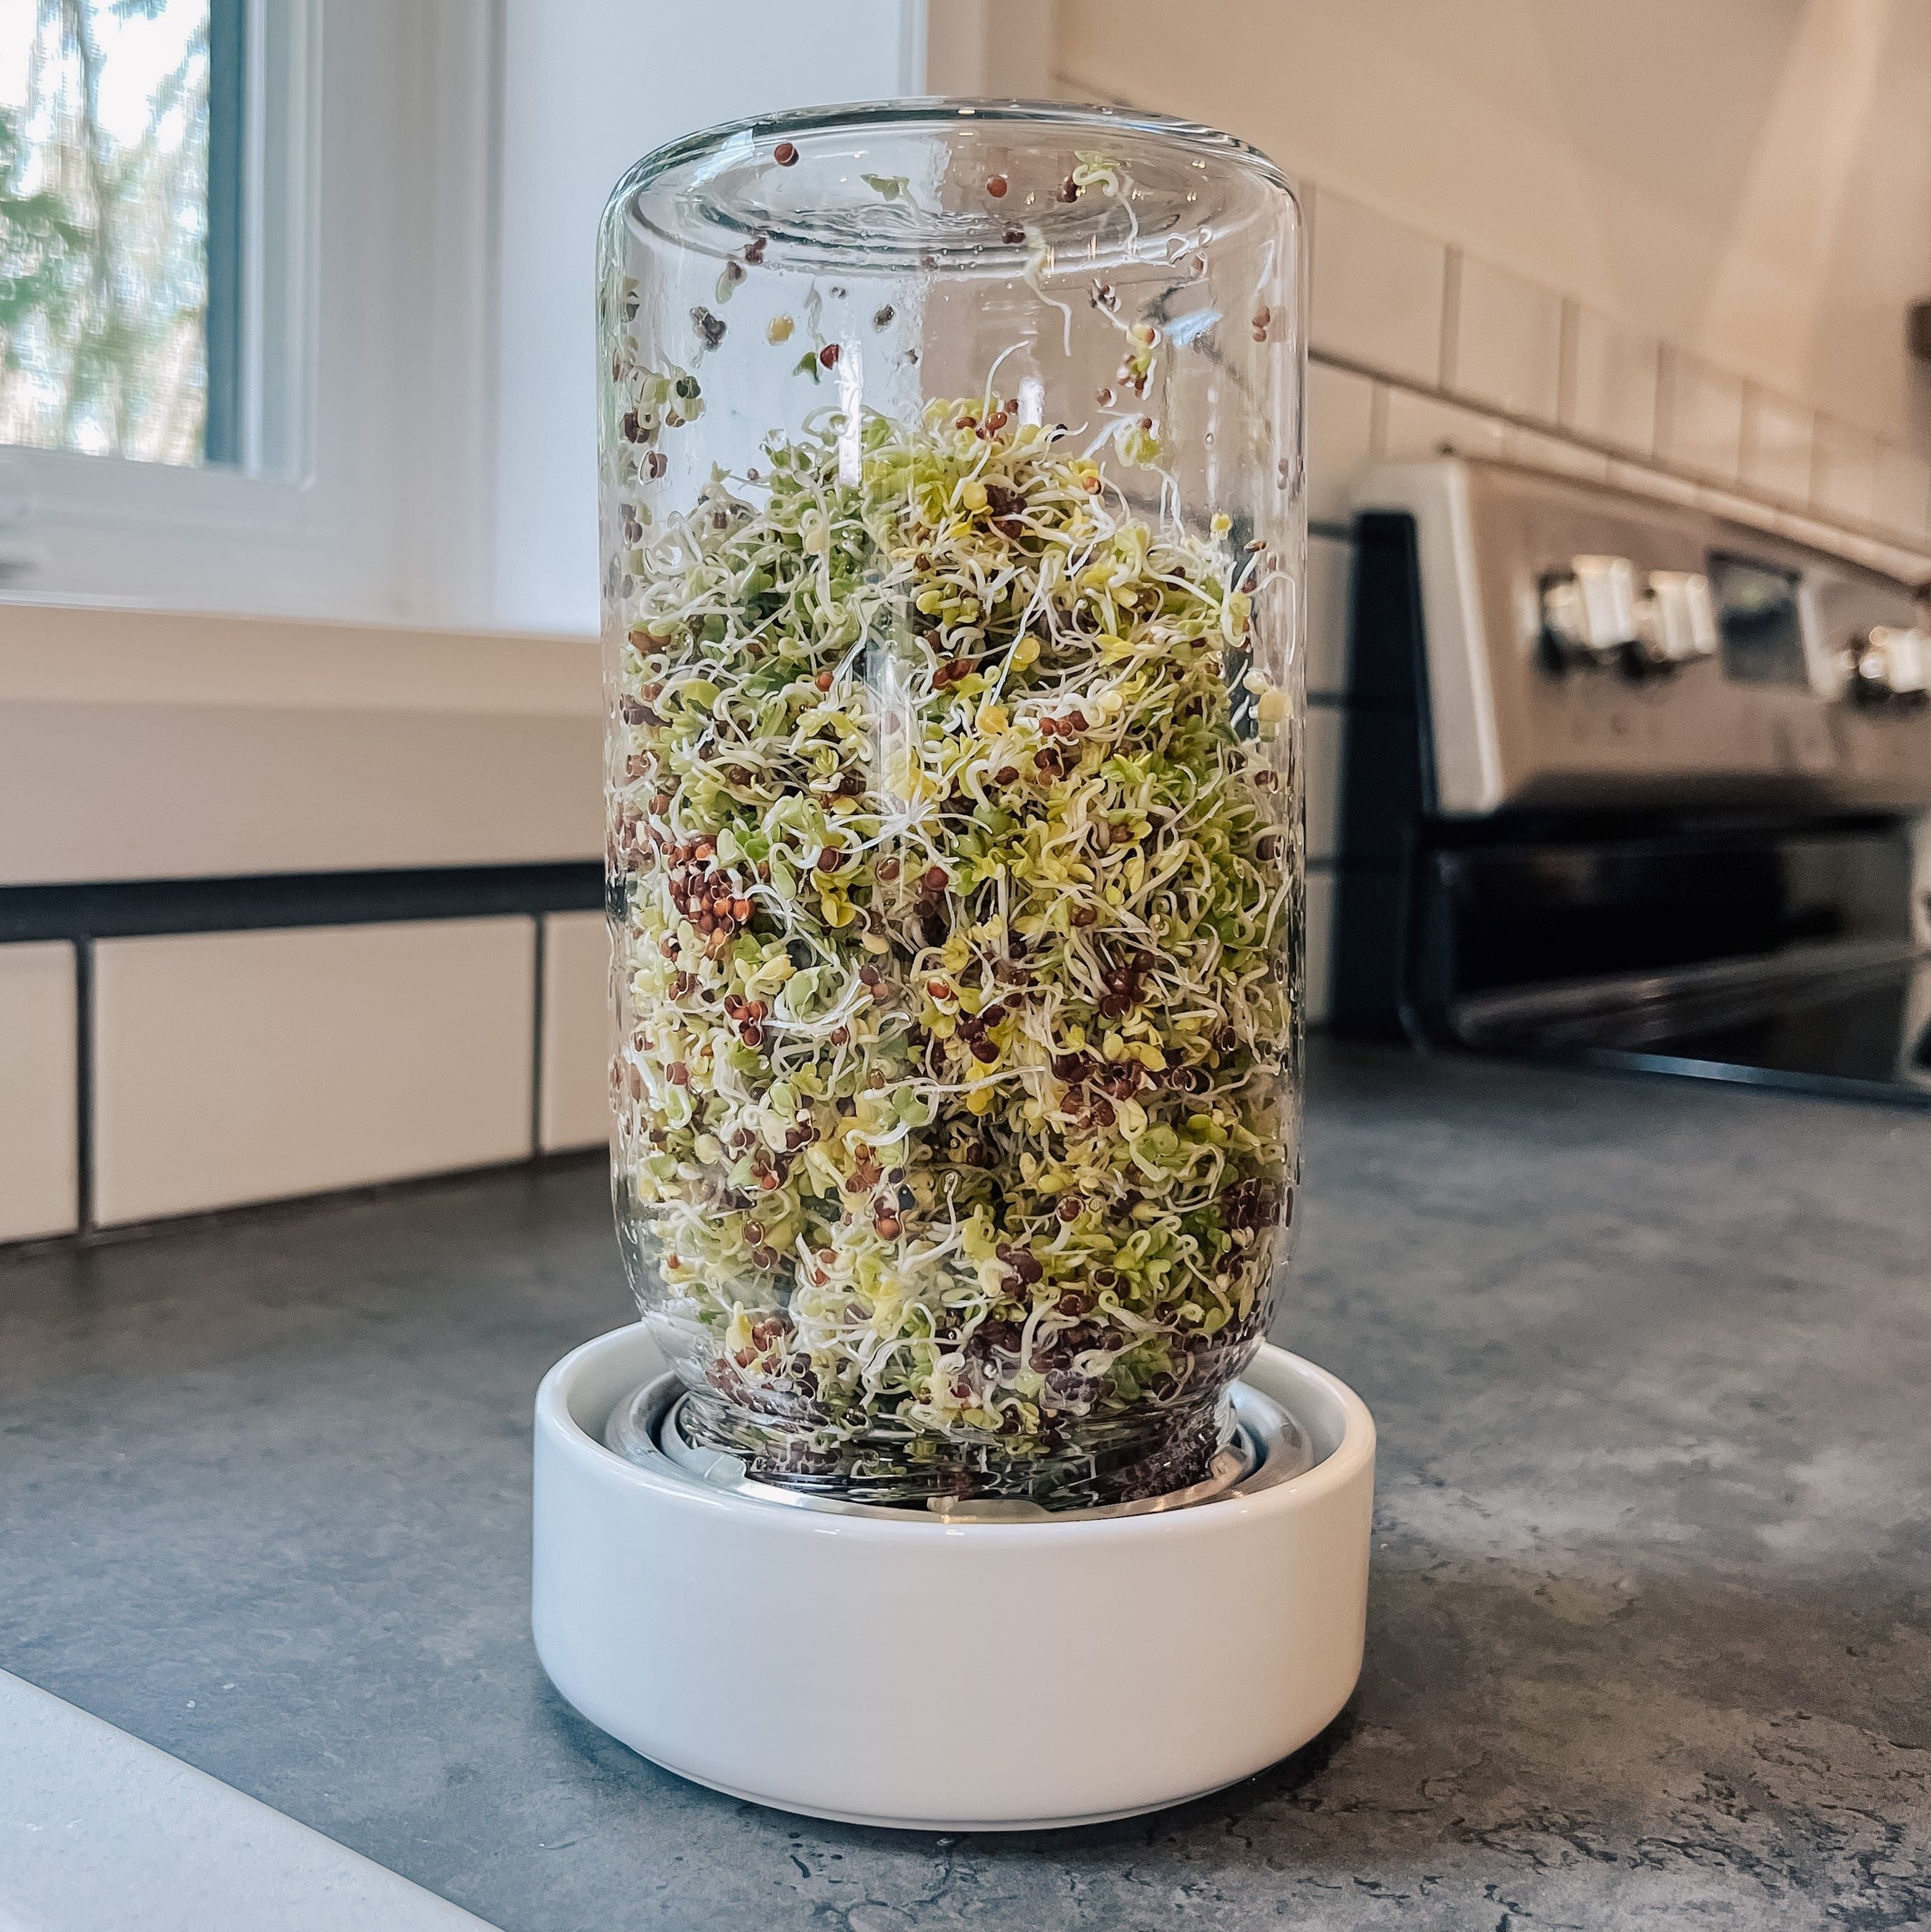 Sprout Jar Kit on a kitchen counter with broccoli sprouts